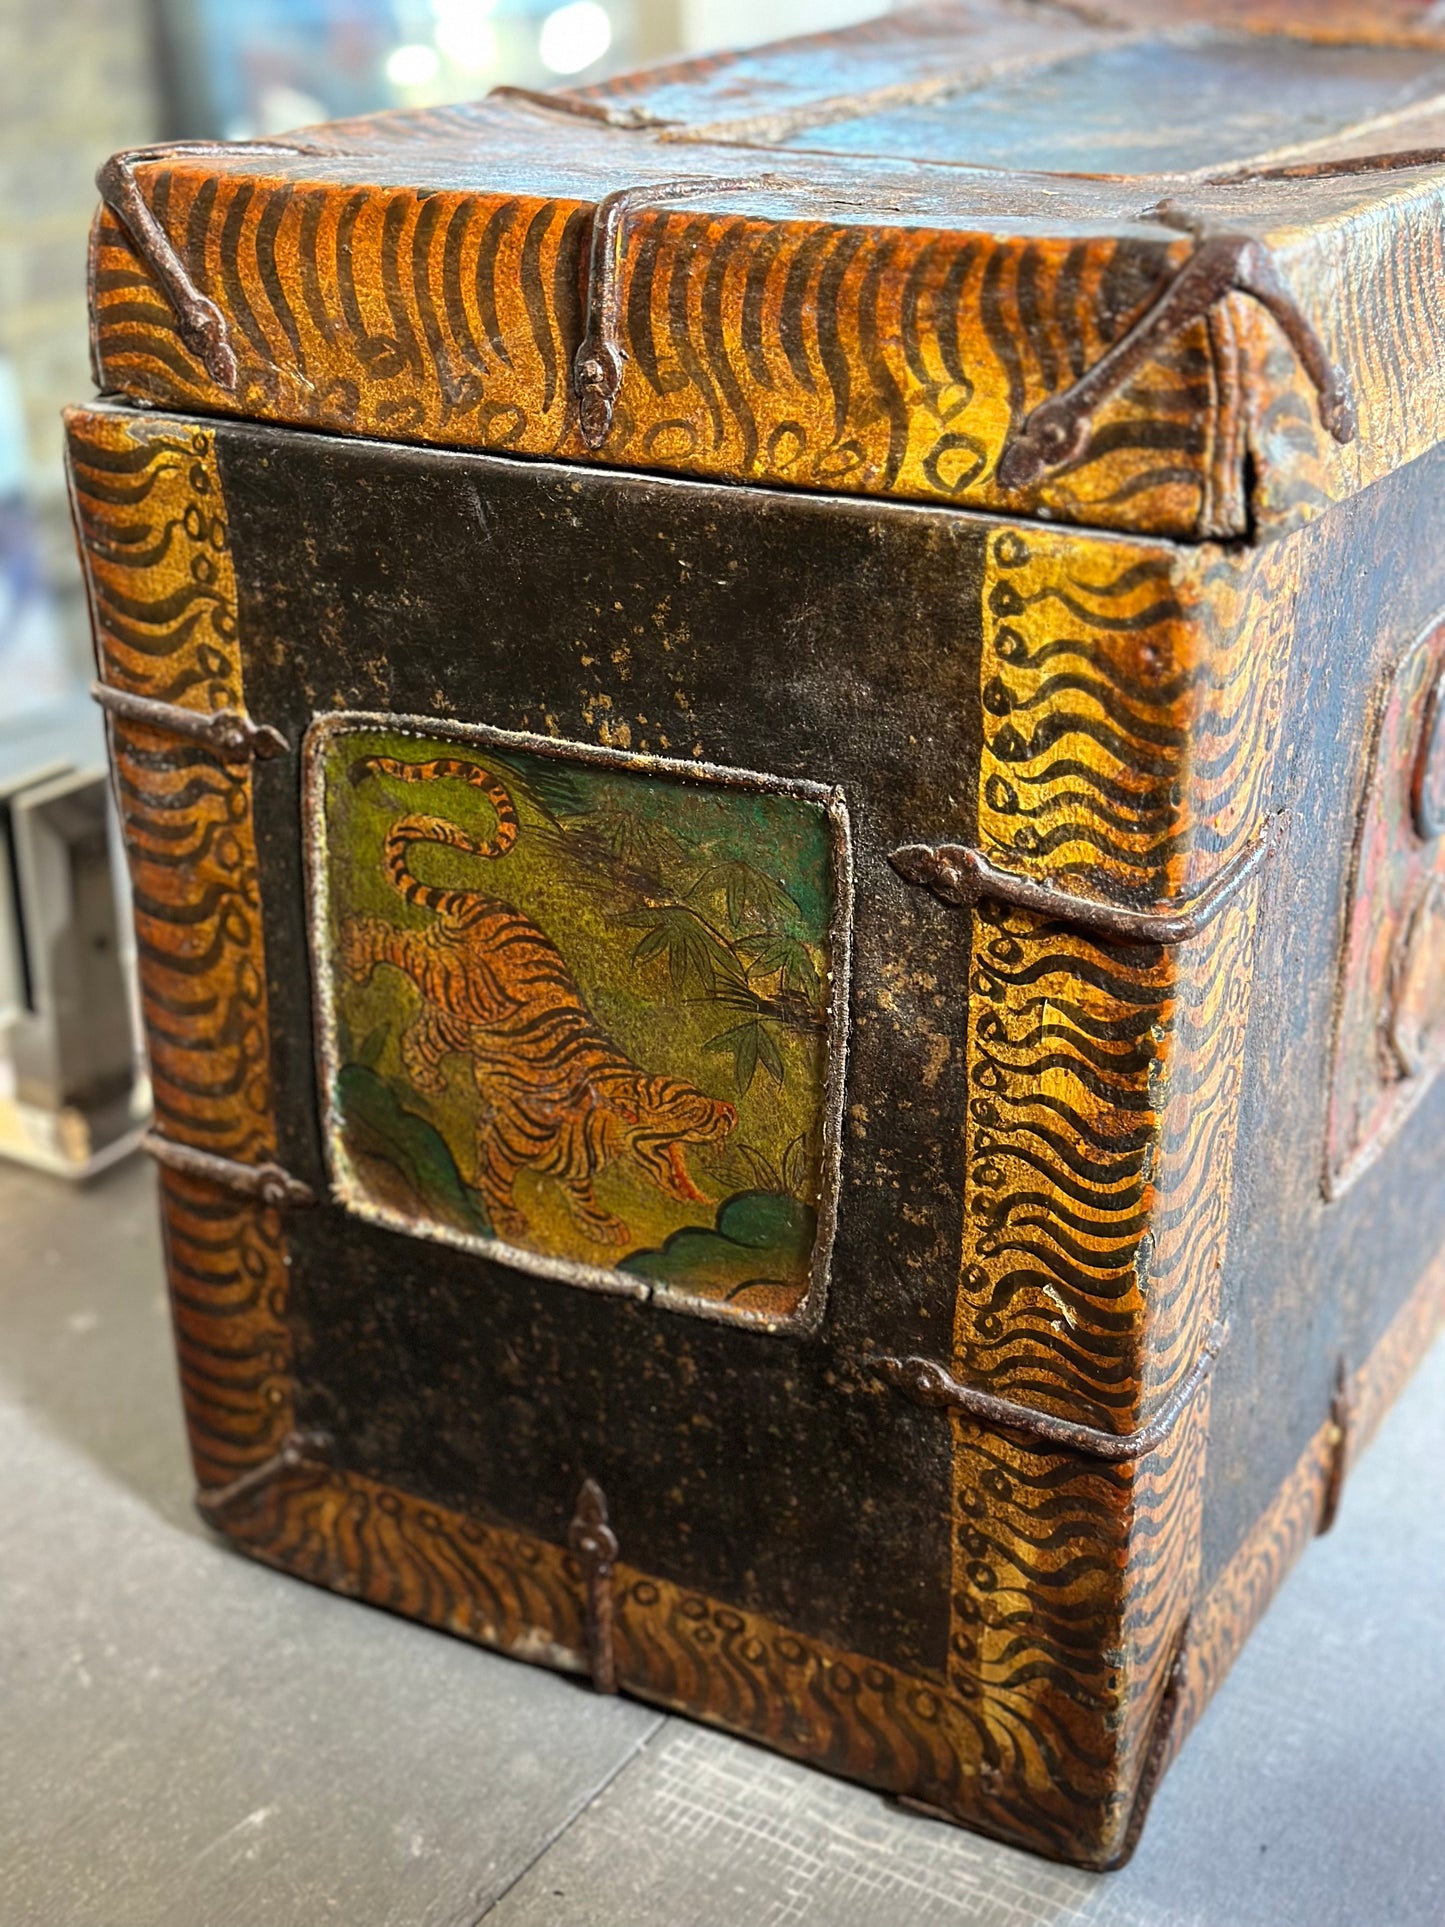 100 Year Old Mongolian Painted Leather Trunk